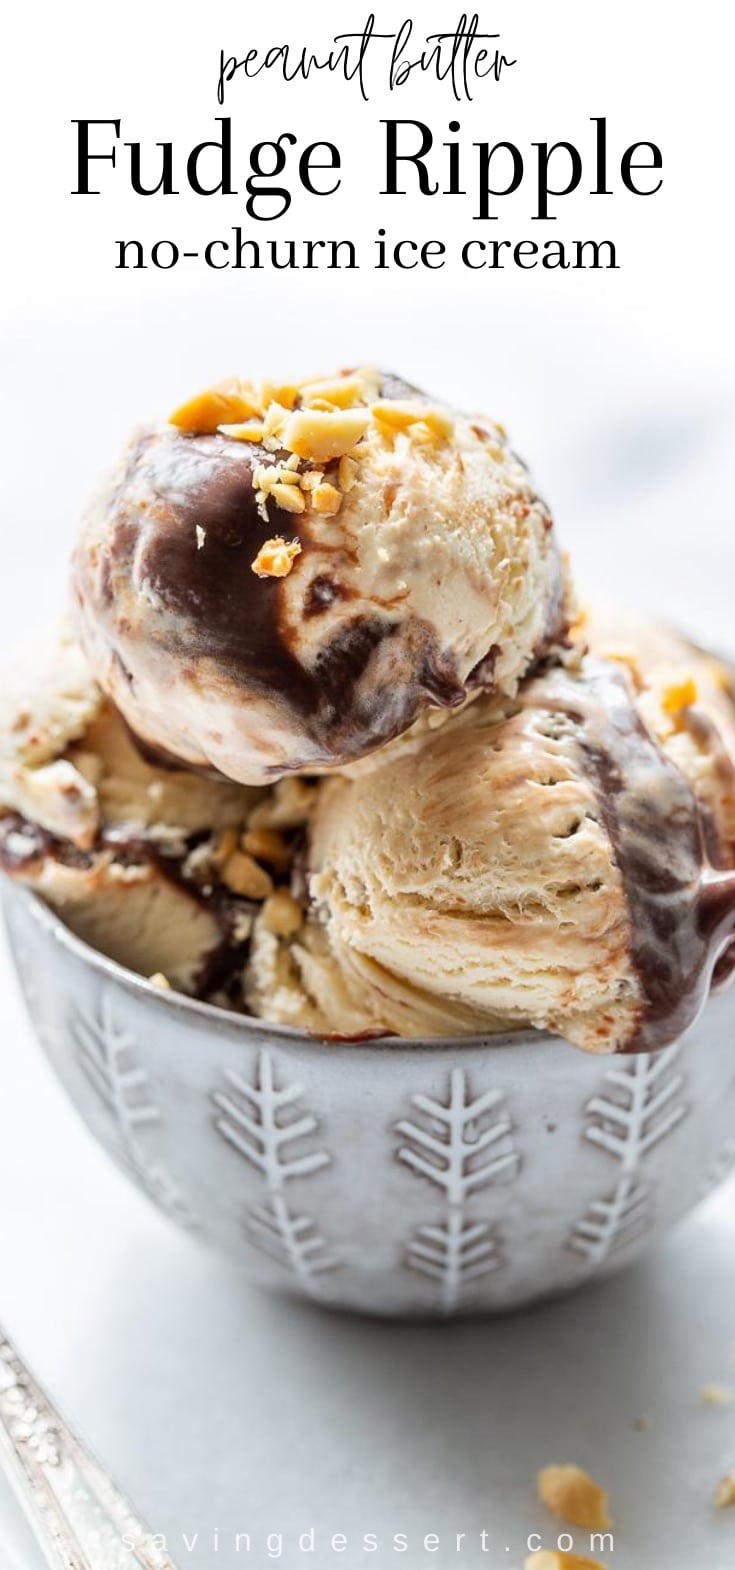 A bowl filled with scoops of peanut butter fudge ripple no-churn ice cream topped with chopped peanuts